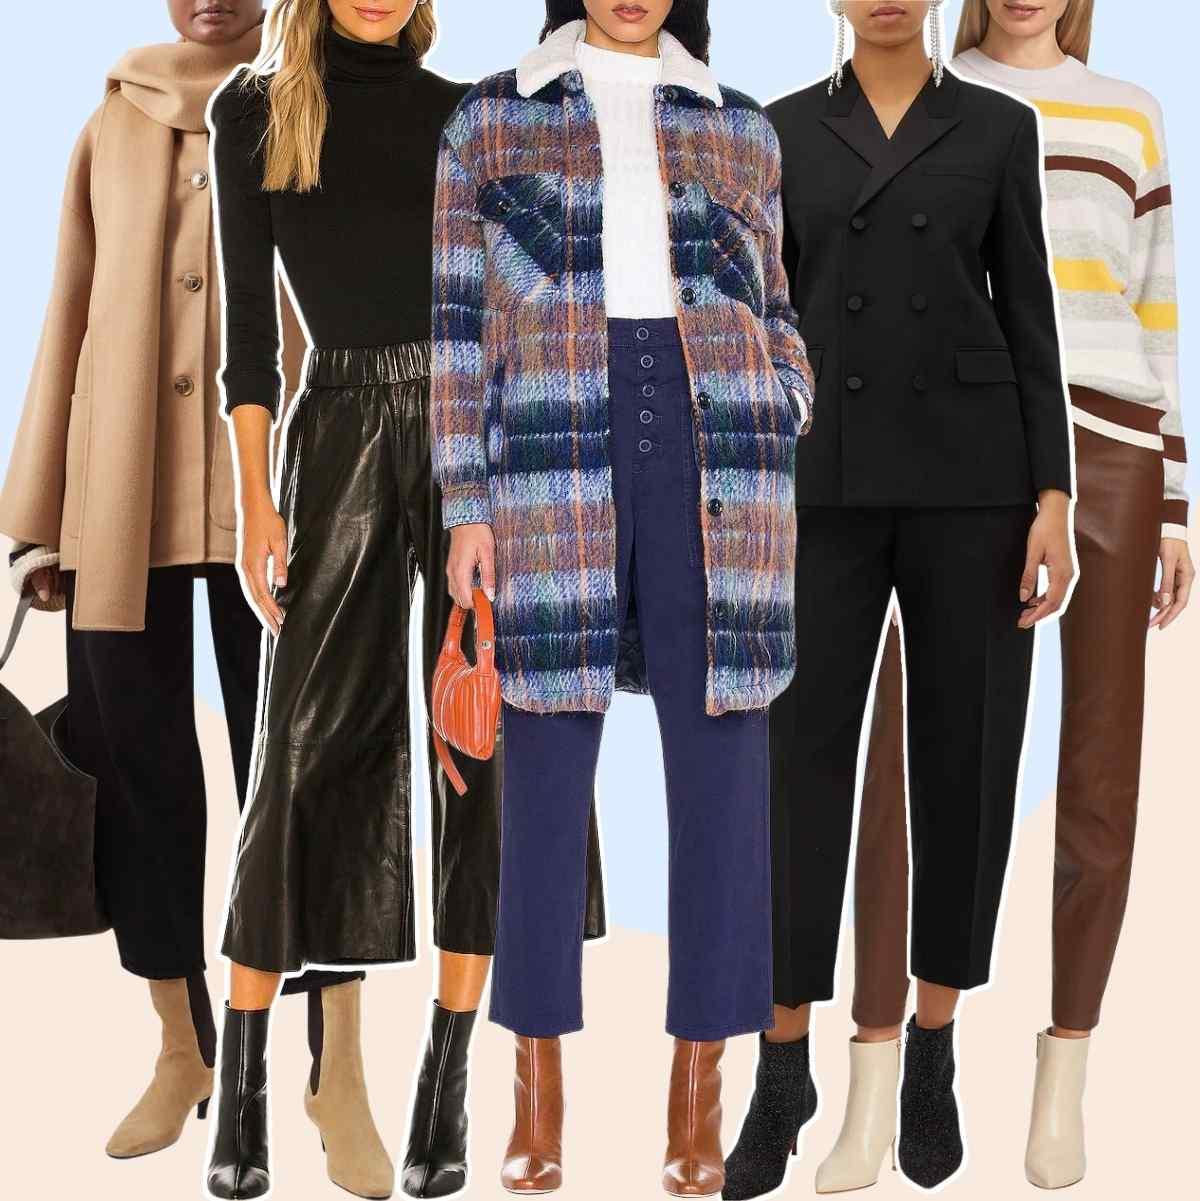 Collage of 4 women wearing cropped dress pants with knee high boots.